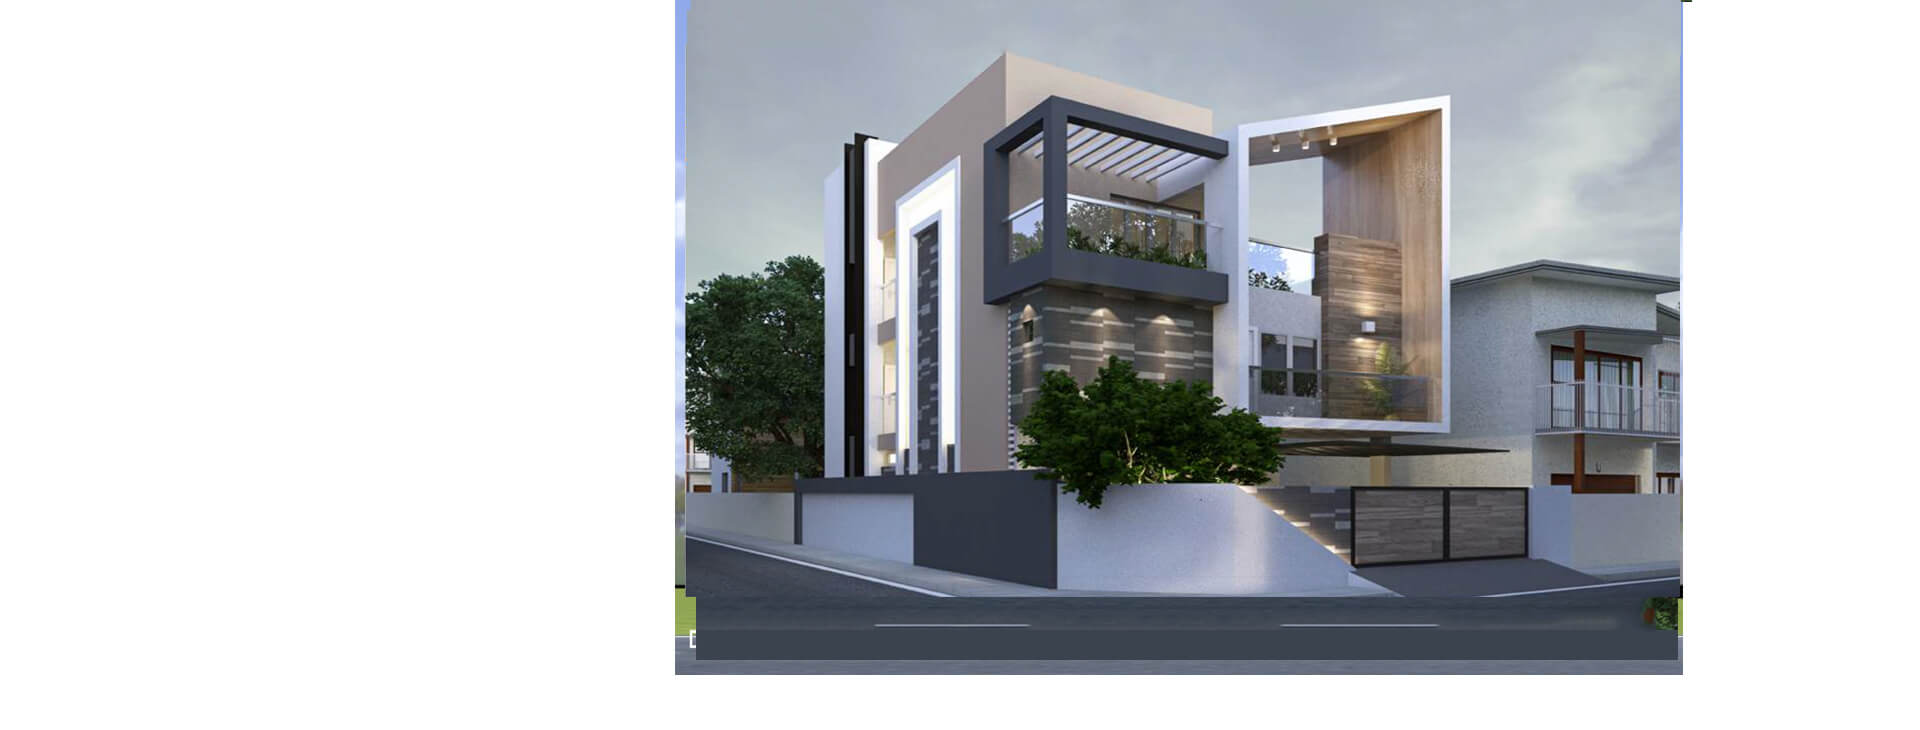 architects in bangalore near me
top architectural firms in bangalore
best interior design firms in bangalore
office interior designers in bangalore
residential  designers in Bangalore
interior designers in Jayanagar
Architects in Tirupur
Architects in Coimbatore
Architects in Bangalore